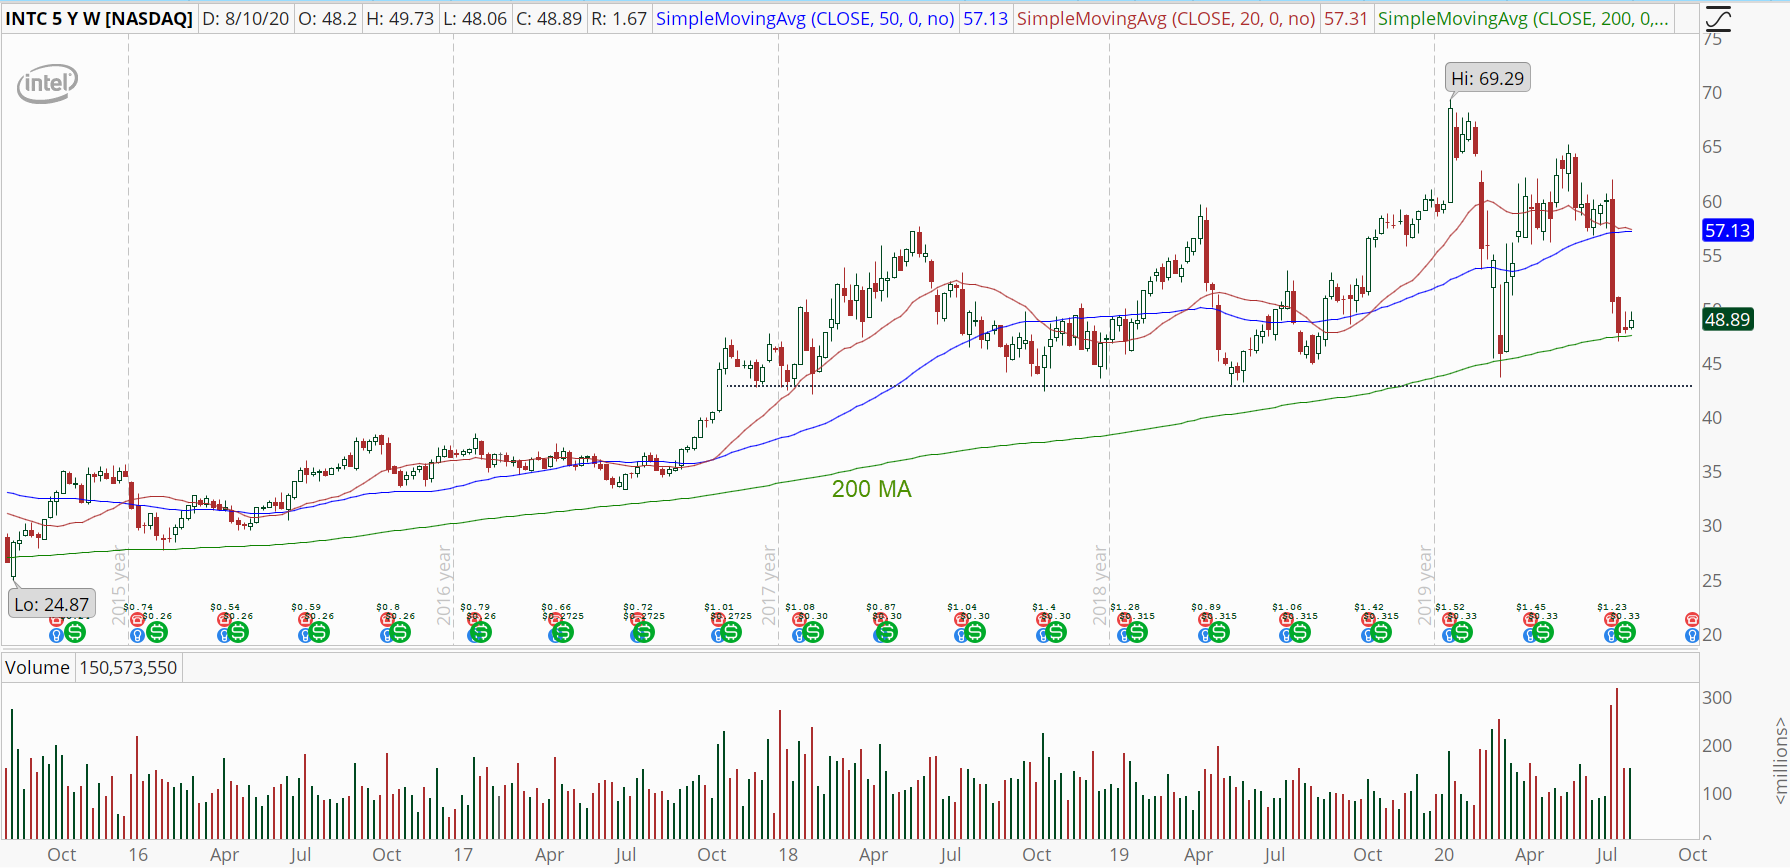 Intel (INTC) weekly chart showing long-term support zones